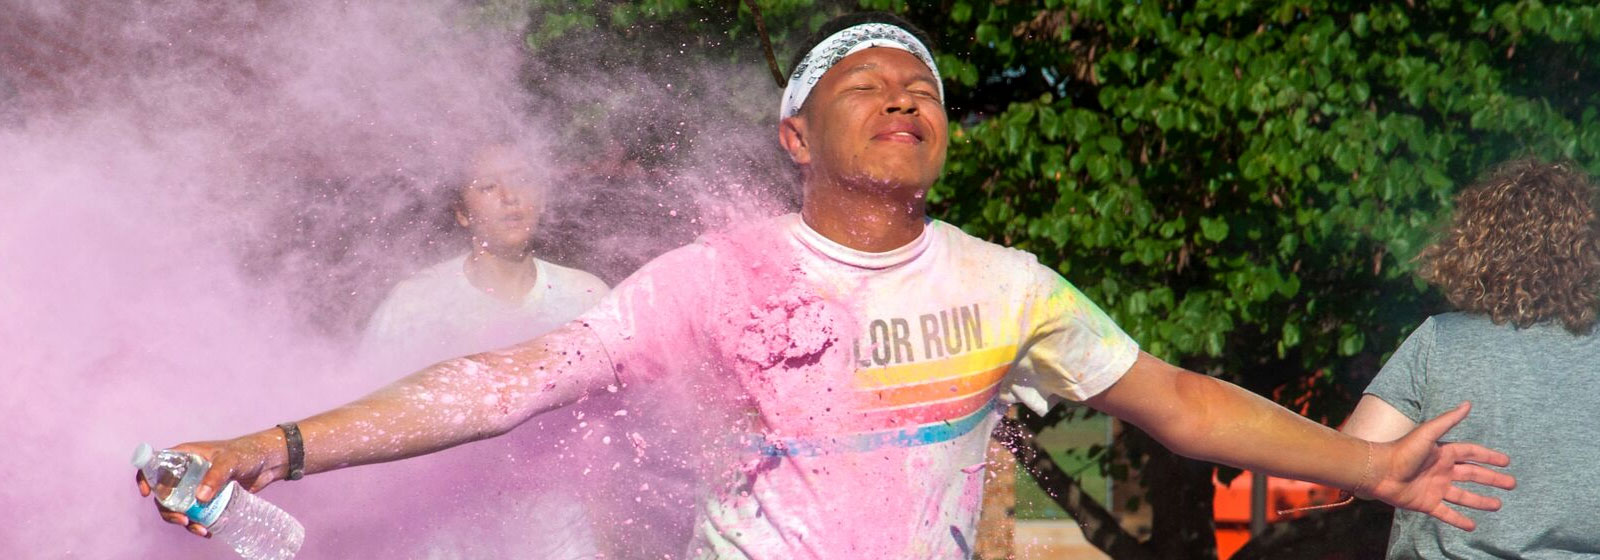 Student getting hit with powder in color run